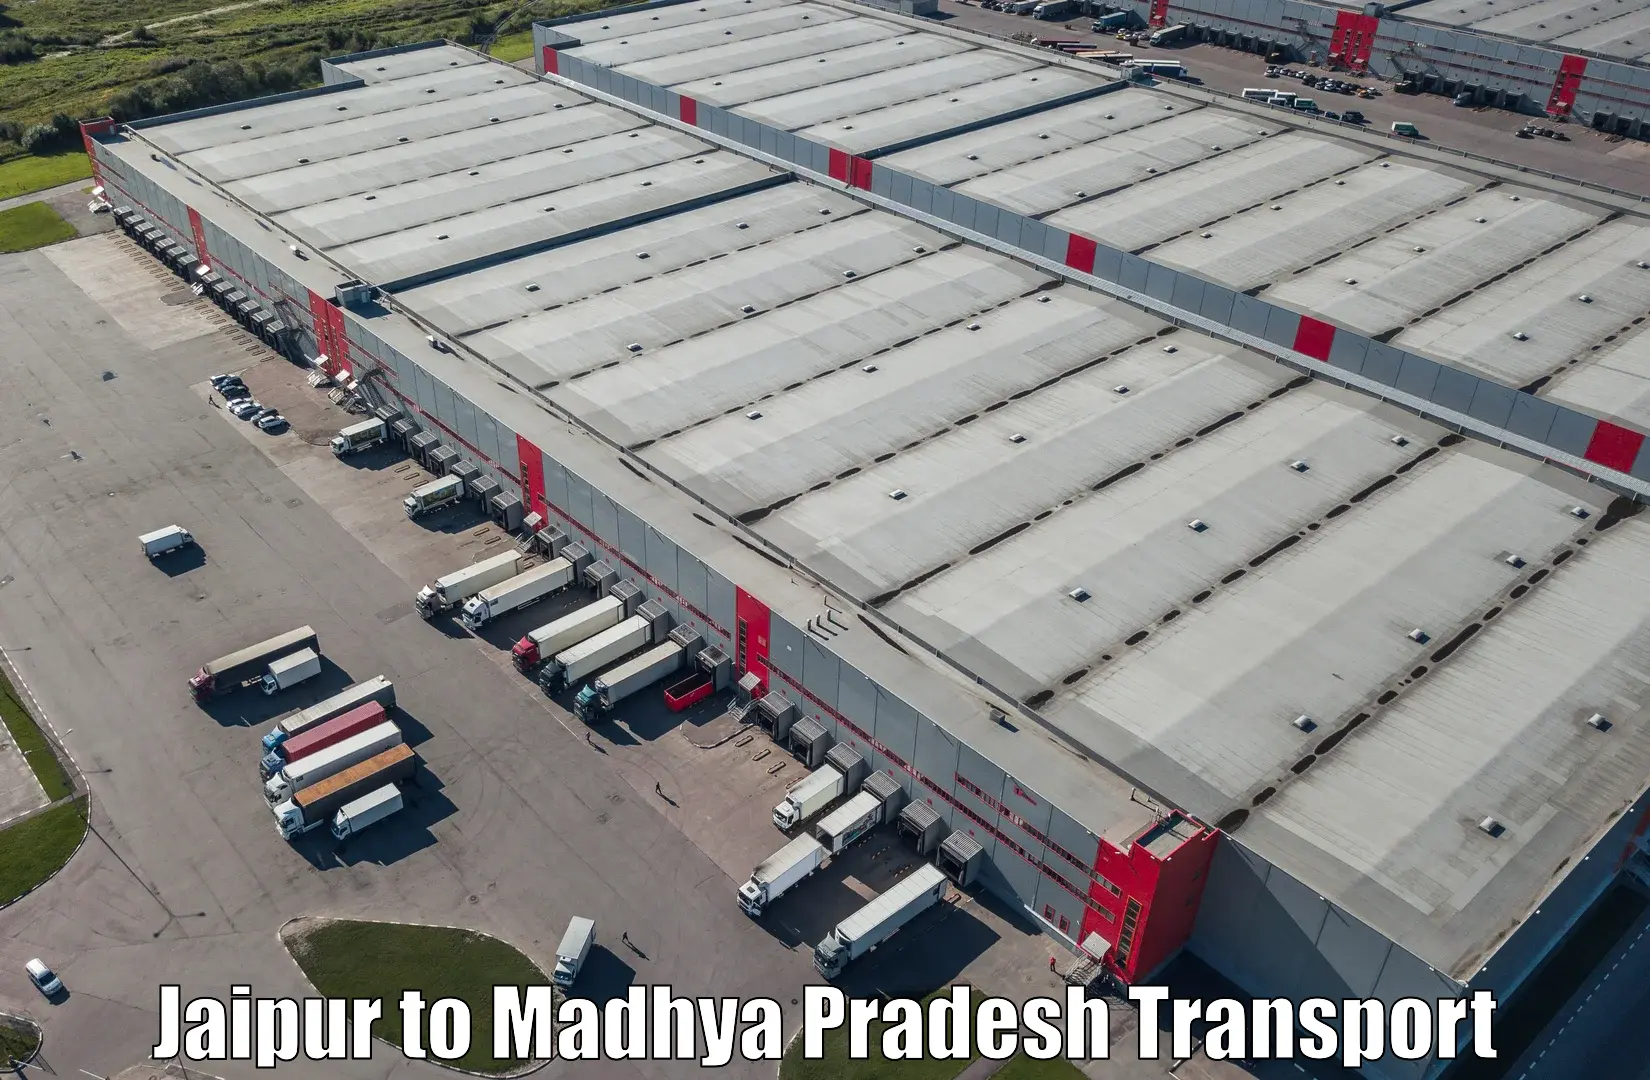 Truck transport companies in India Jaipur to Nainpur